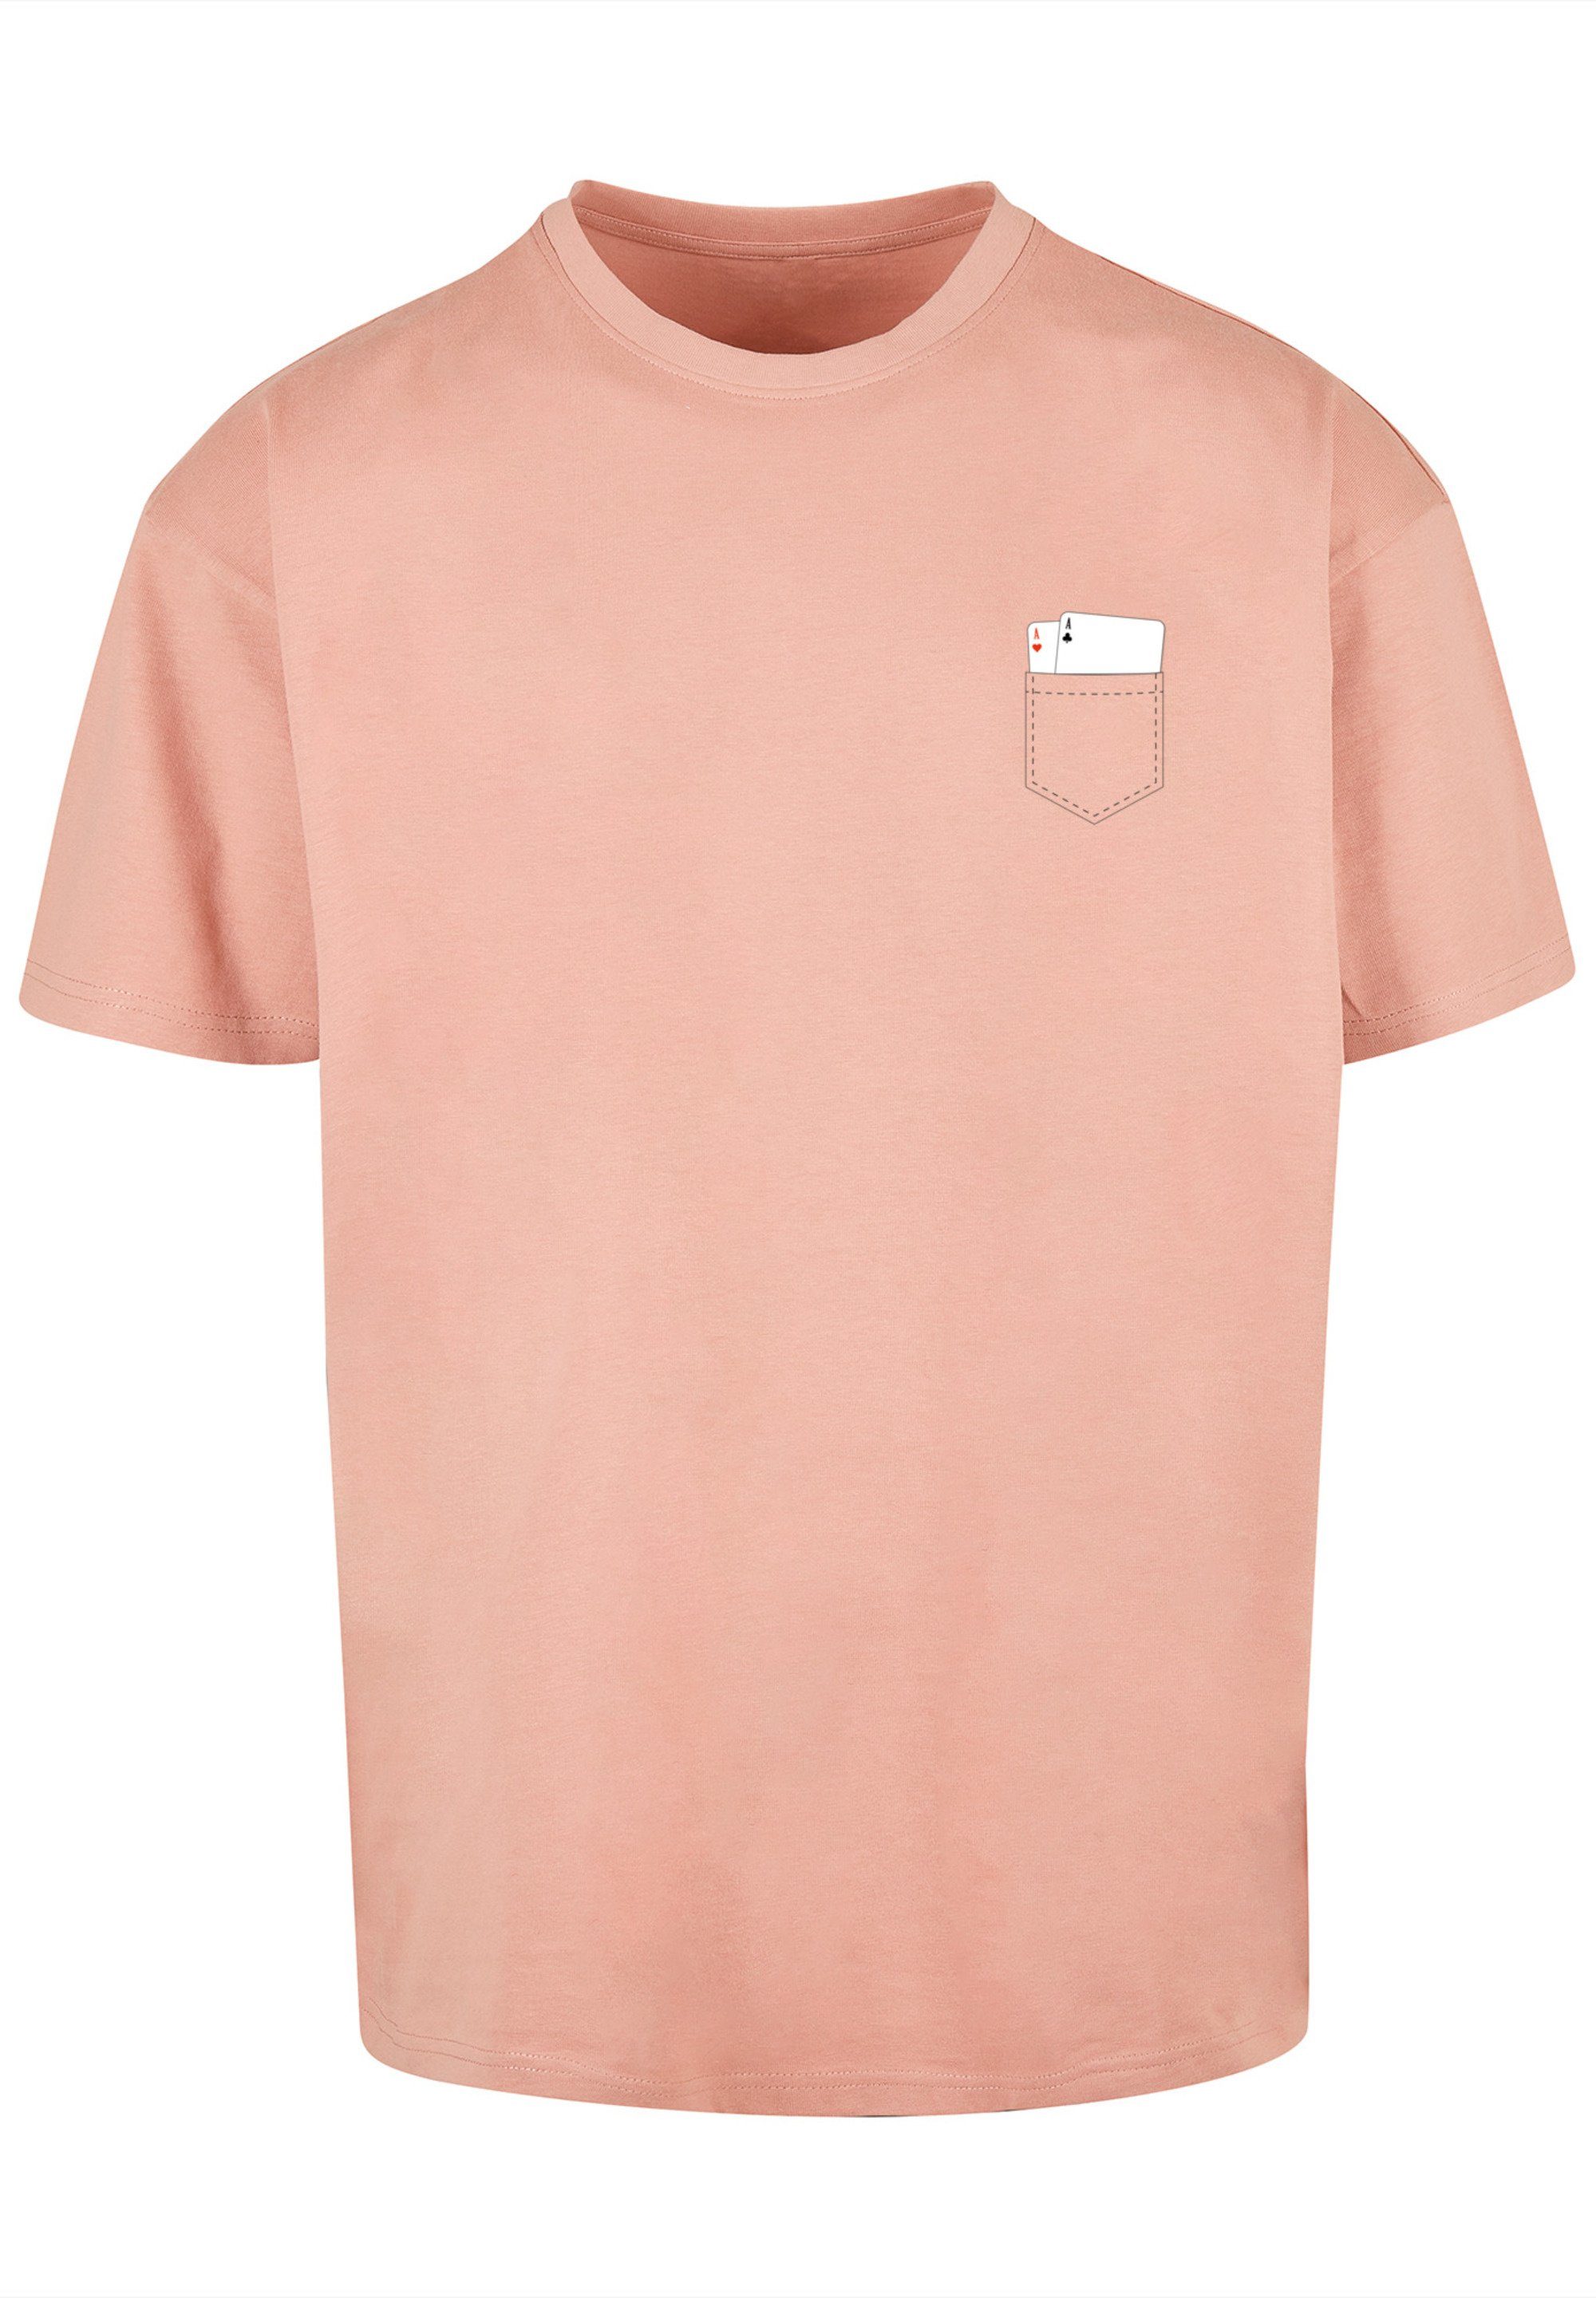 F4NT4STIC with Print Pocket amber Cards T-Shirt